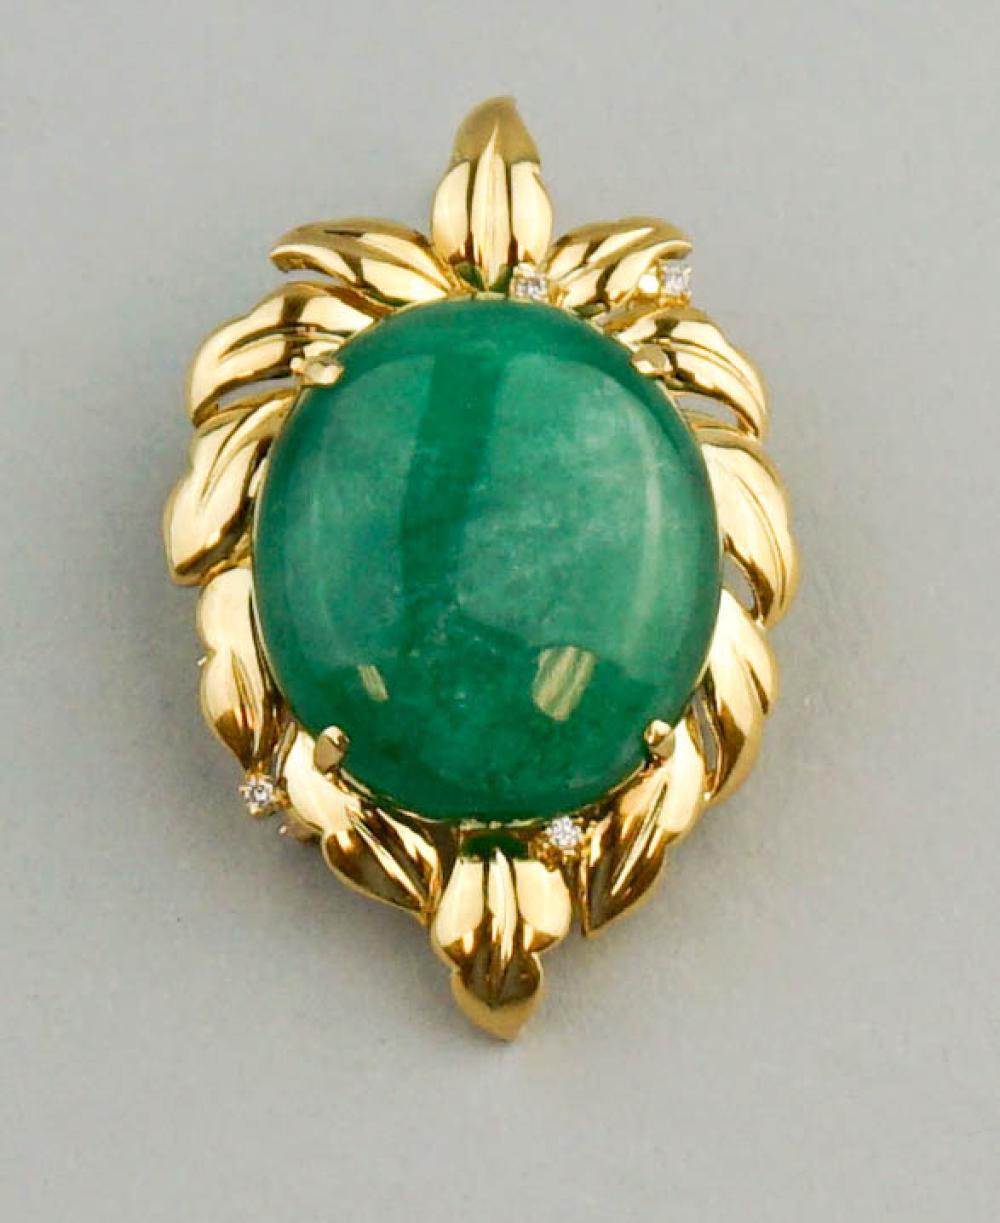 14K YELLOW GOLD WITH GREEN CABOCHON 33a4d9